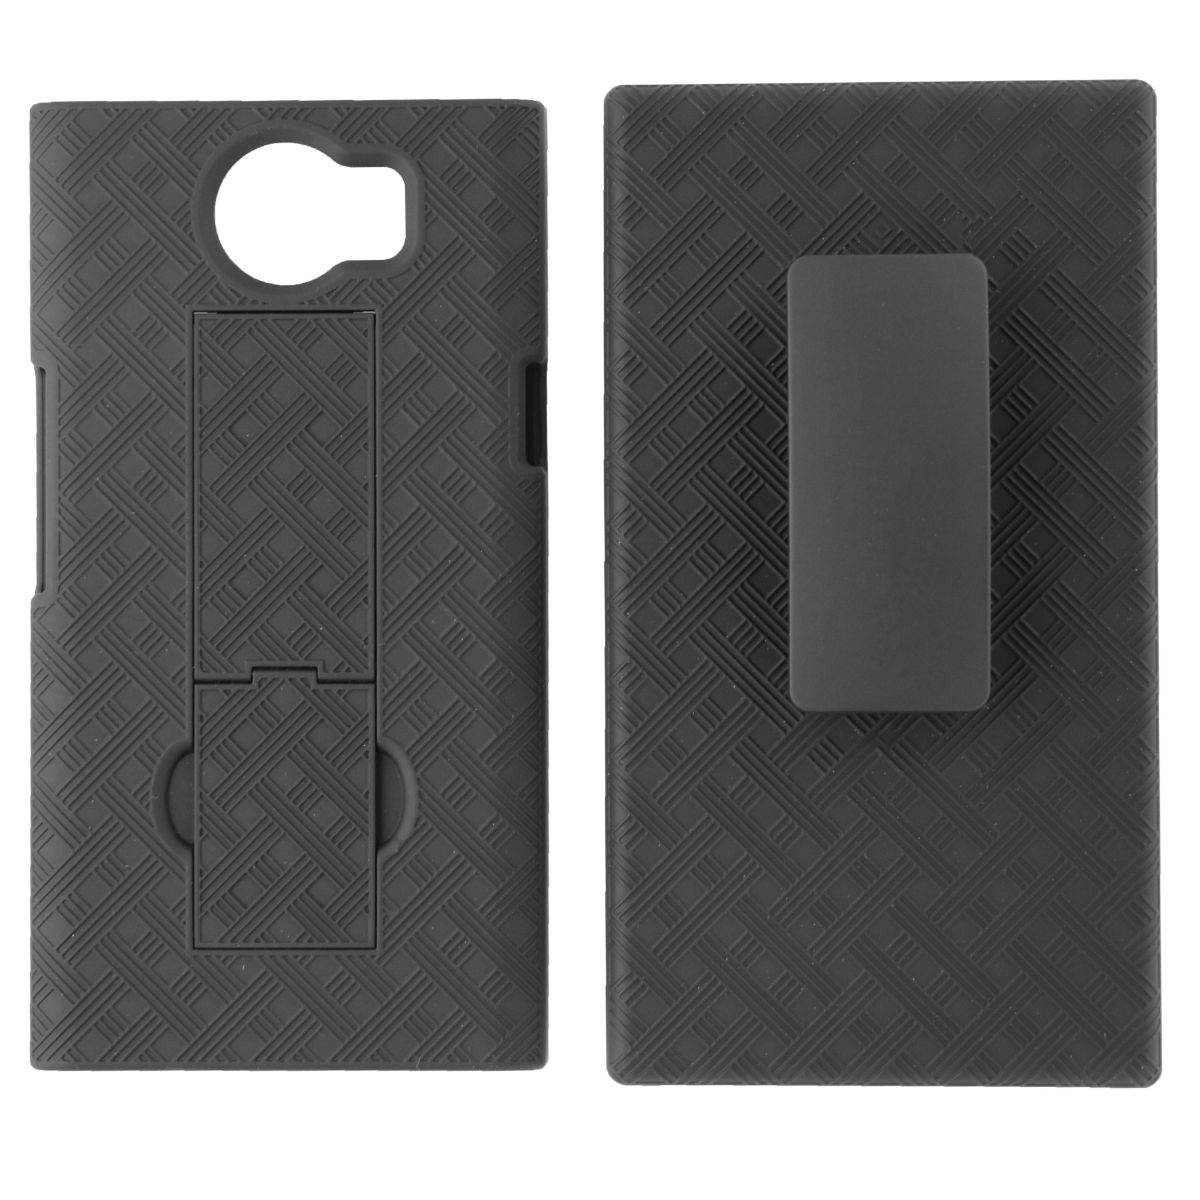 Verizon Shell And Holster Combo With Kickstand For The Blackberry Priv - Black